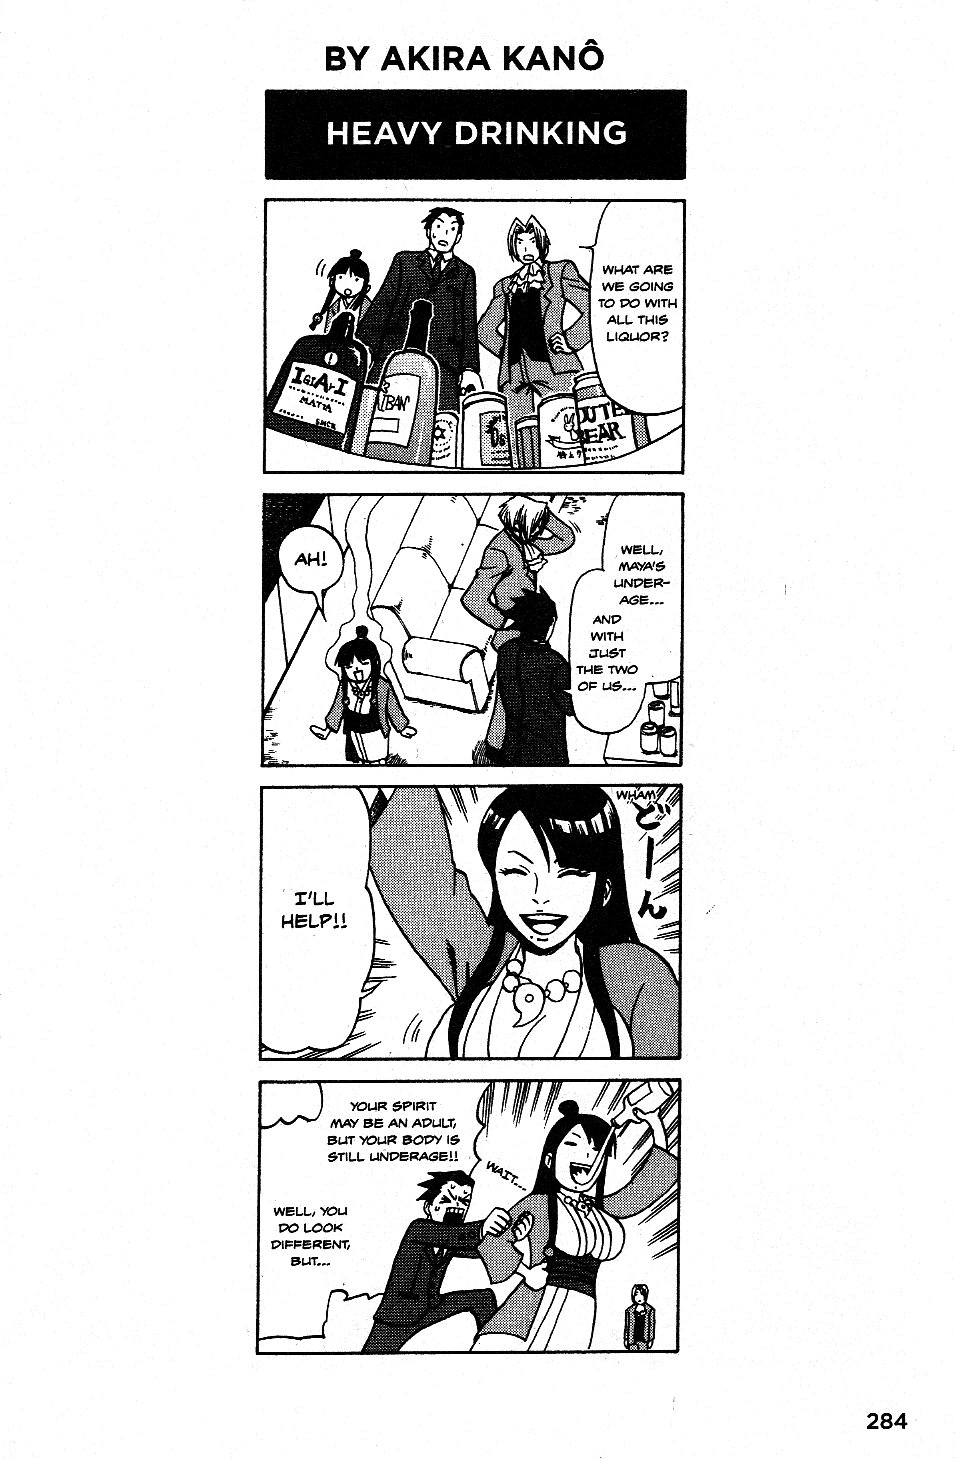 Phoenix Wright: Ace Attorney - Official Casebook Vol.1 Chapter 20.5: Four Panel Comic Strips - By Kikuchiyo Anko & Aira Kanô - Picture 2